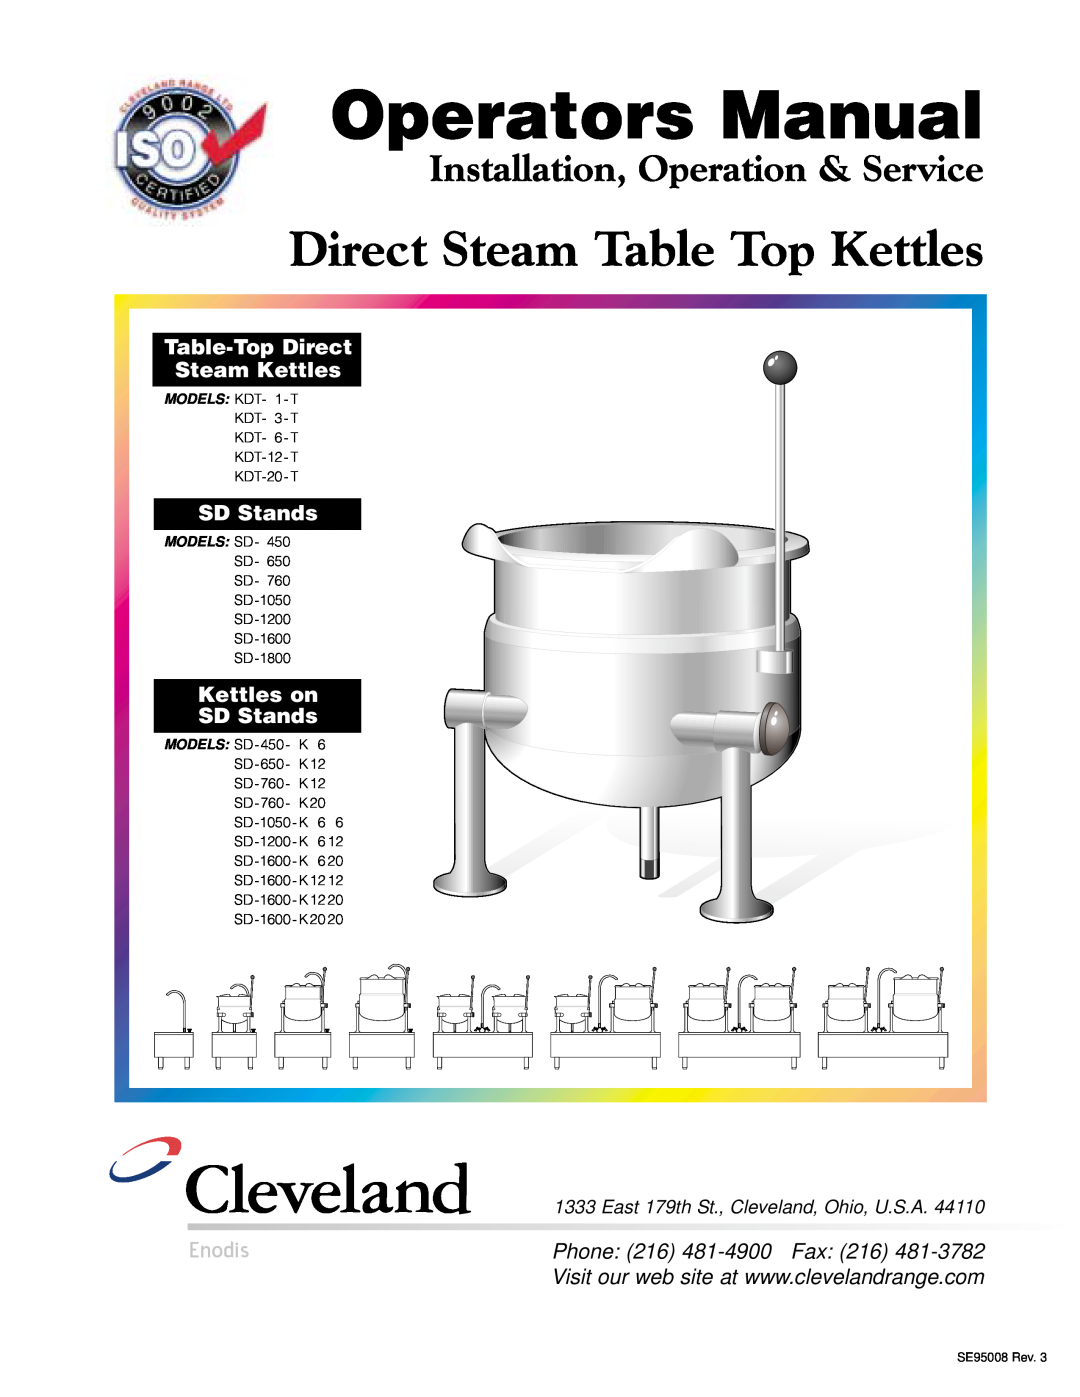 Cleveland Range SD-760-K20 manual Operators Manual, Direct Steam Table Top Kettles, Installation, Operation & Service 